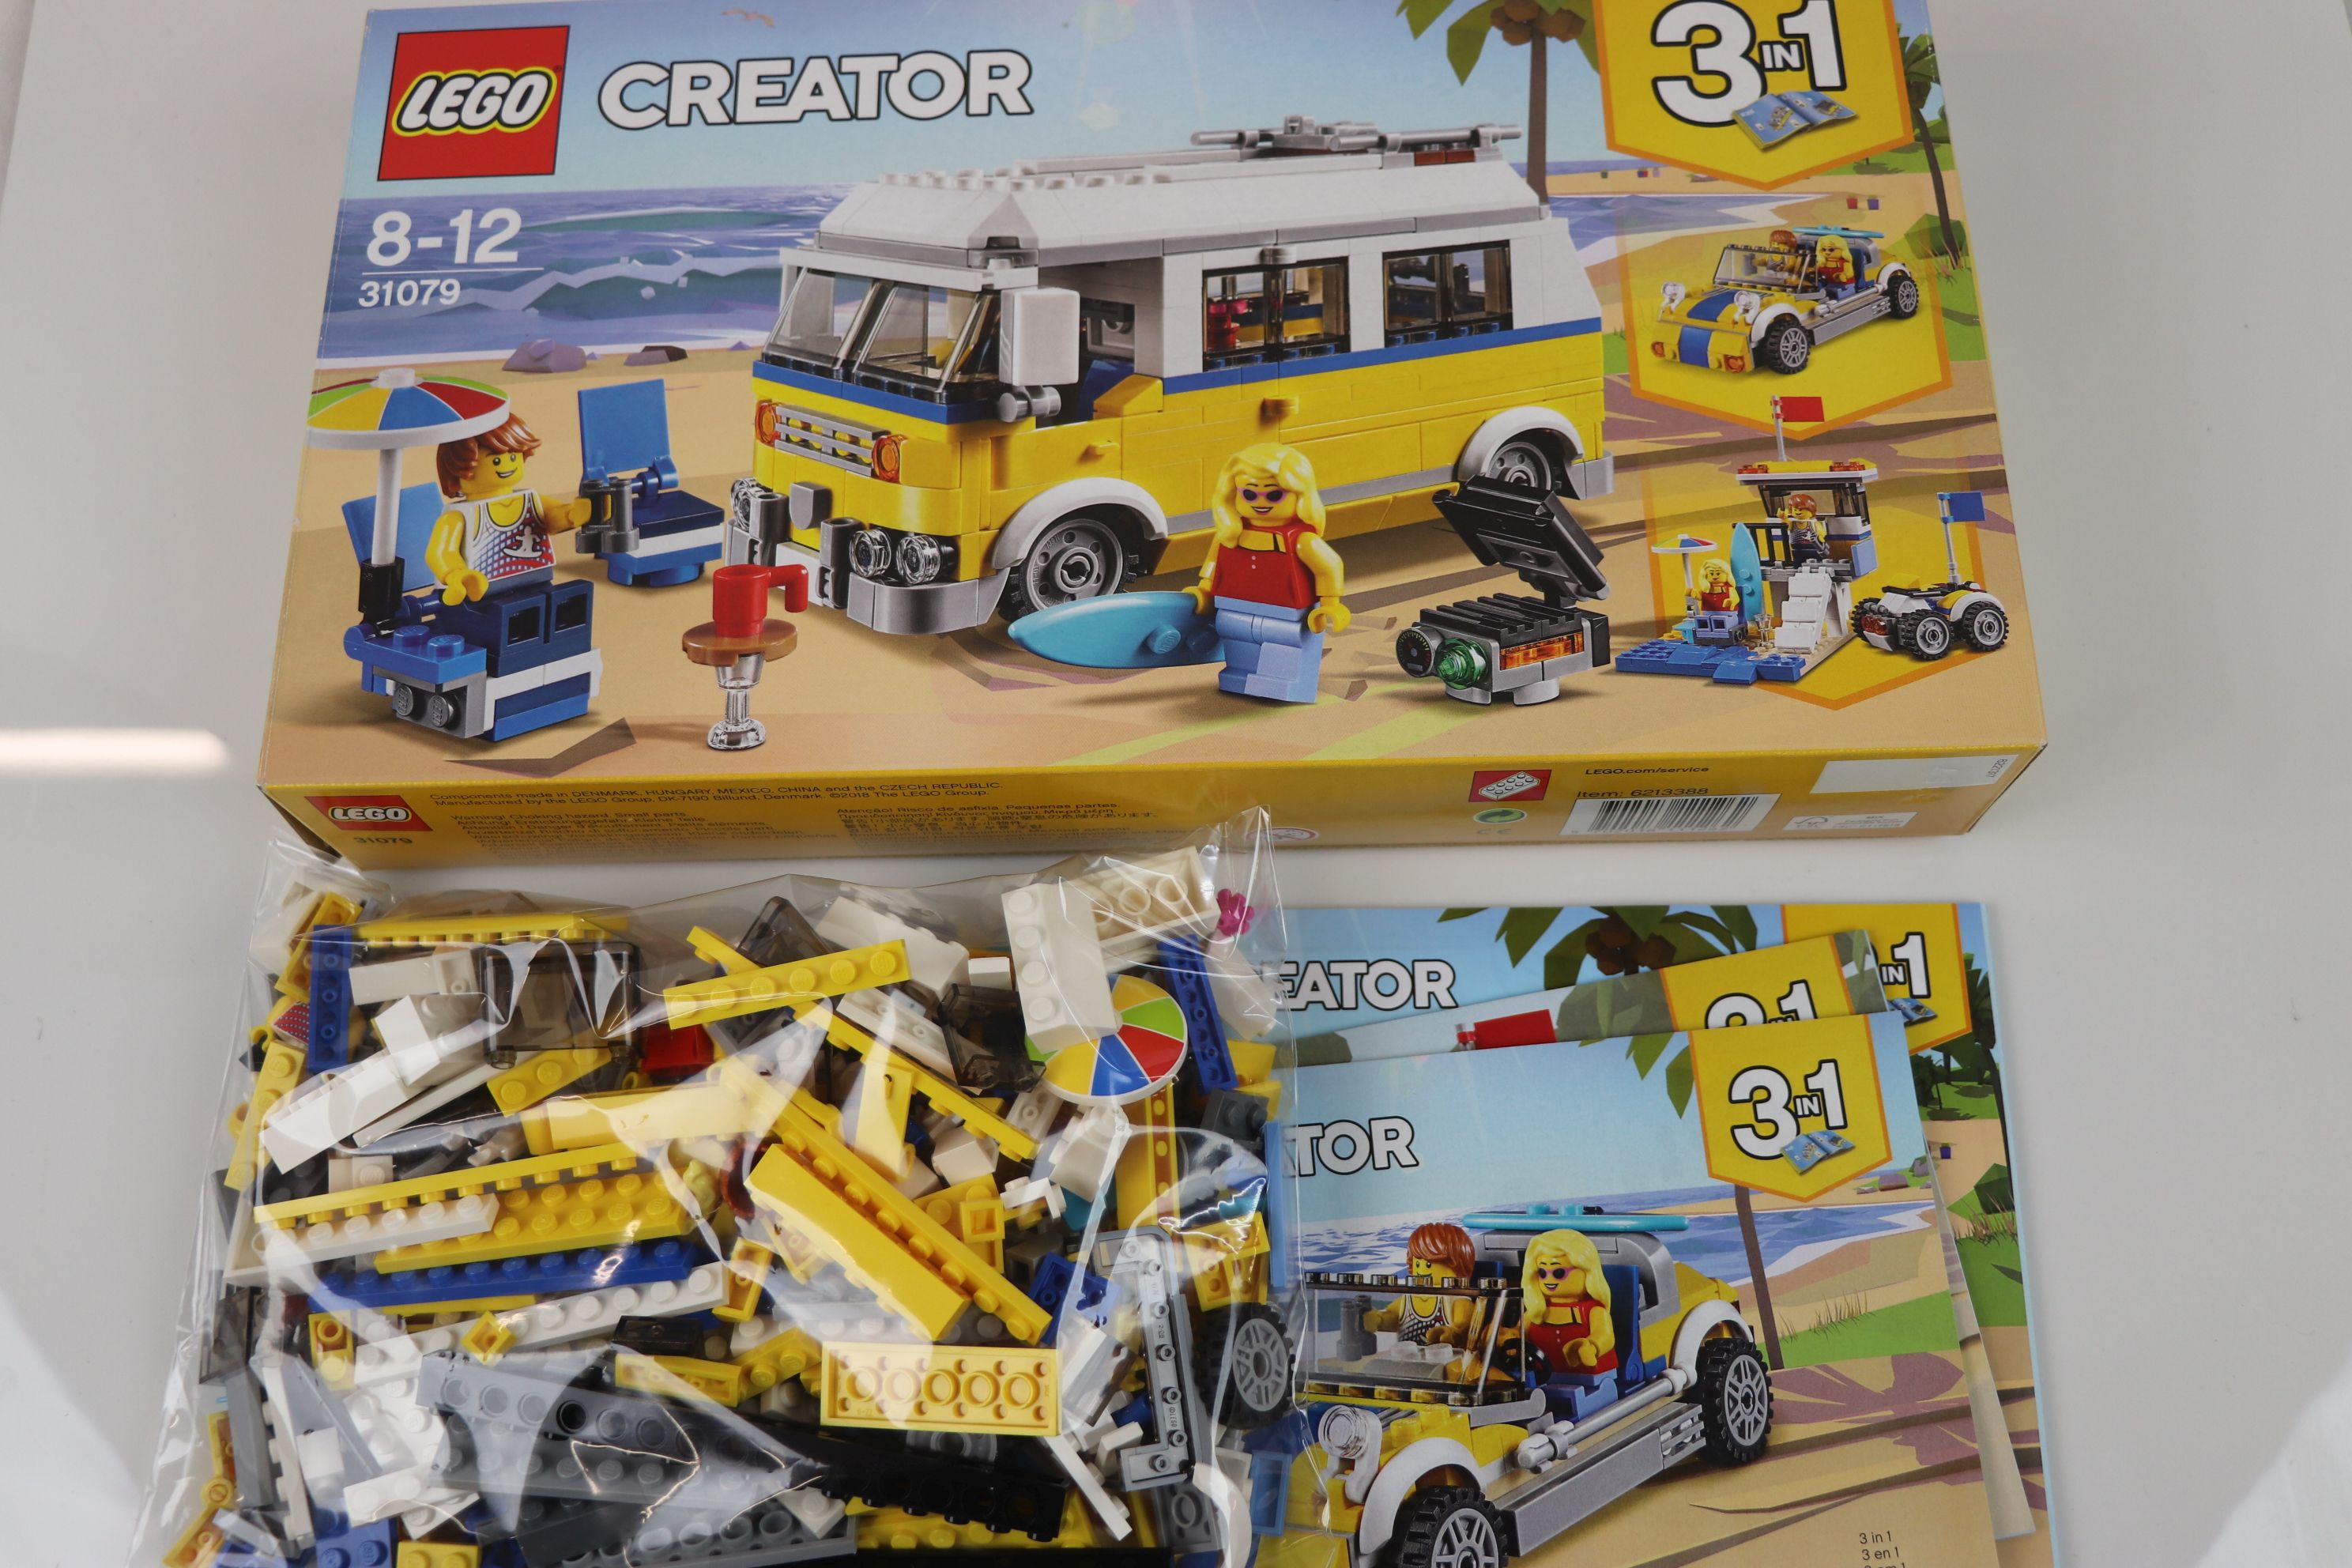 Seven boxed Lego Creator sets to include 31052, 31079, 31066, 40252, 40220, 31031 and 31044 - Image 11 of 31